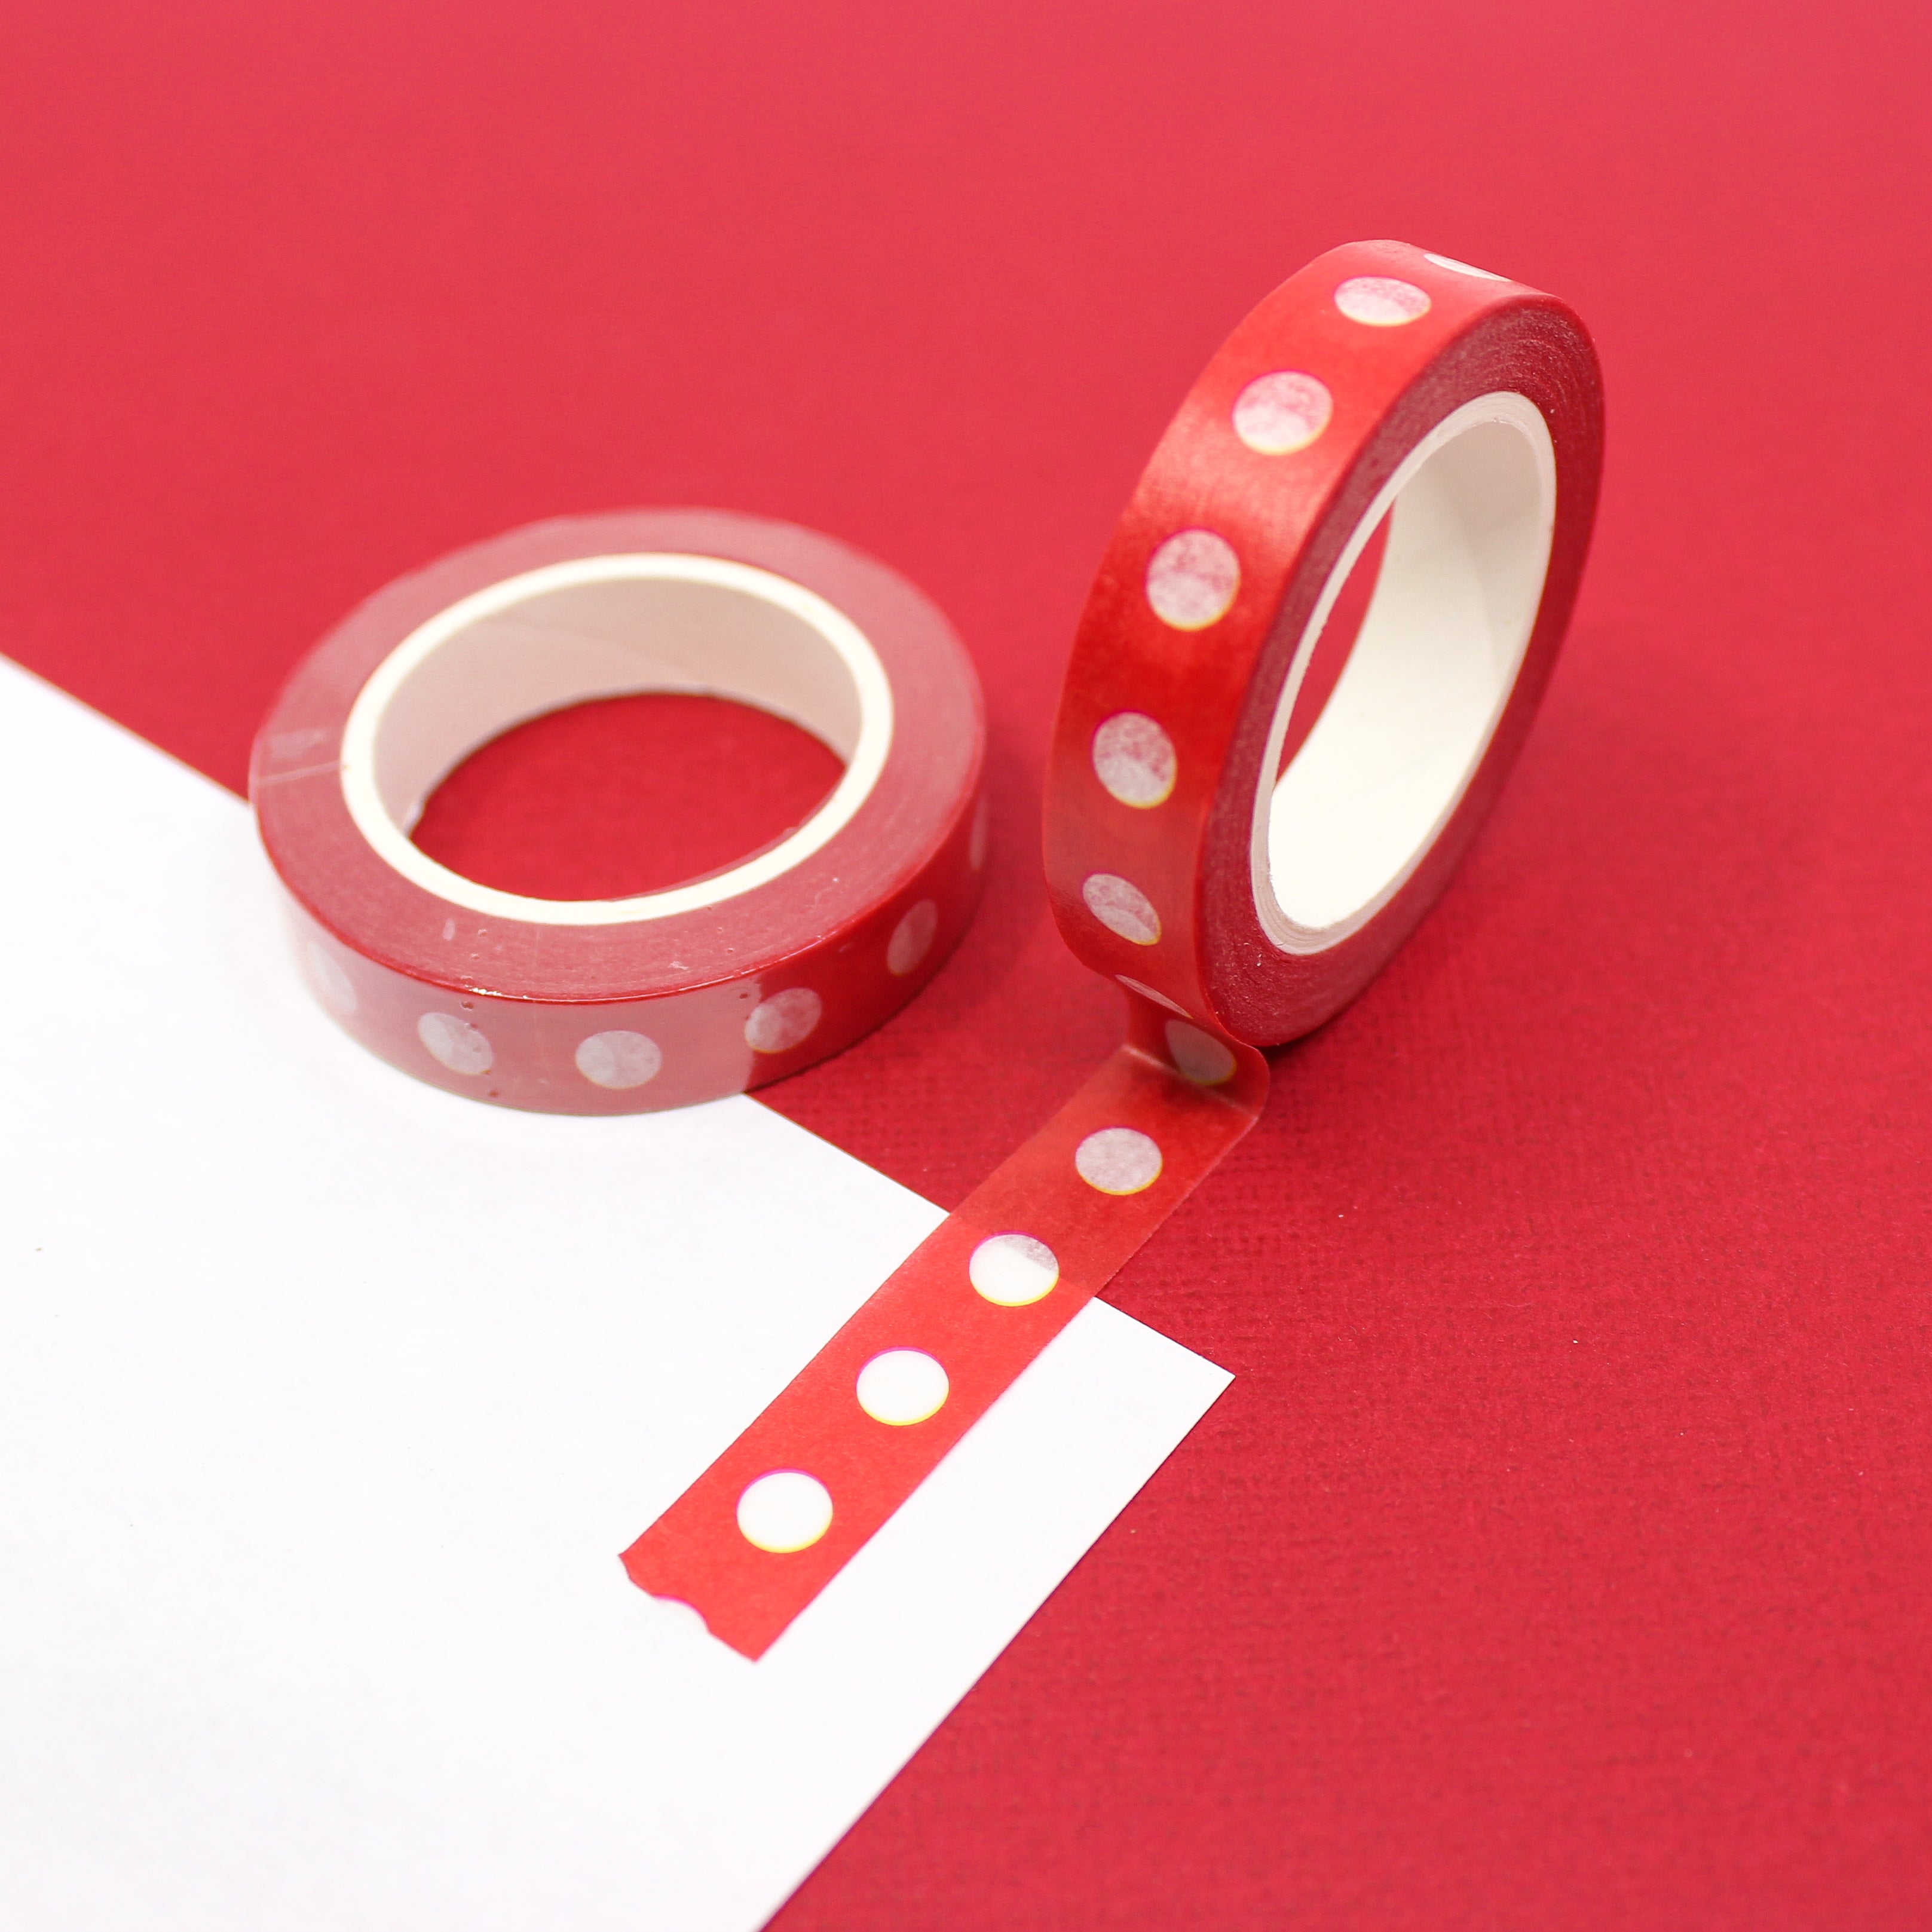 This is red dotted border Washi tape from BBB Supplies.